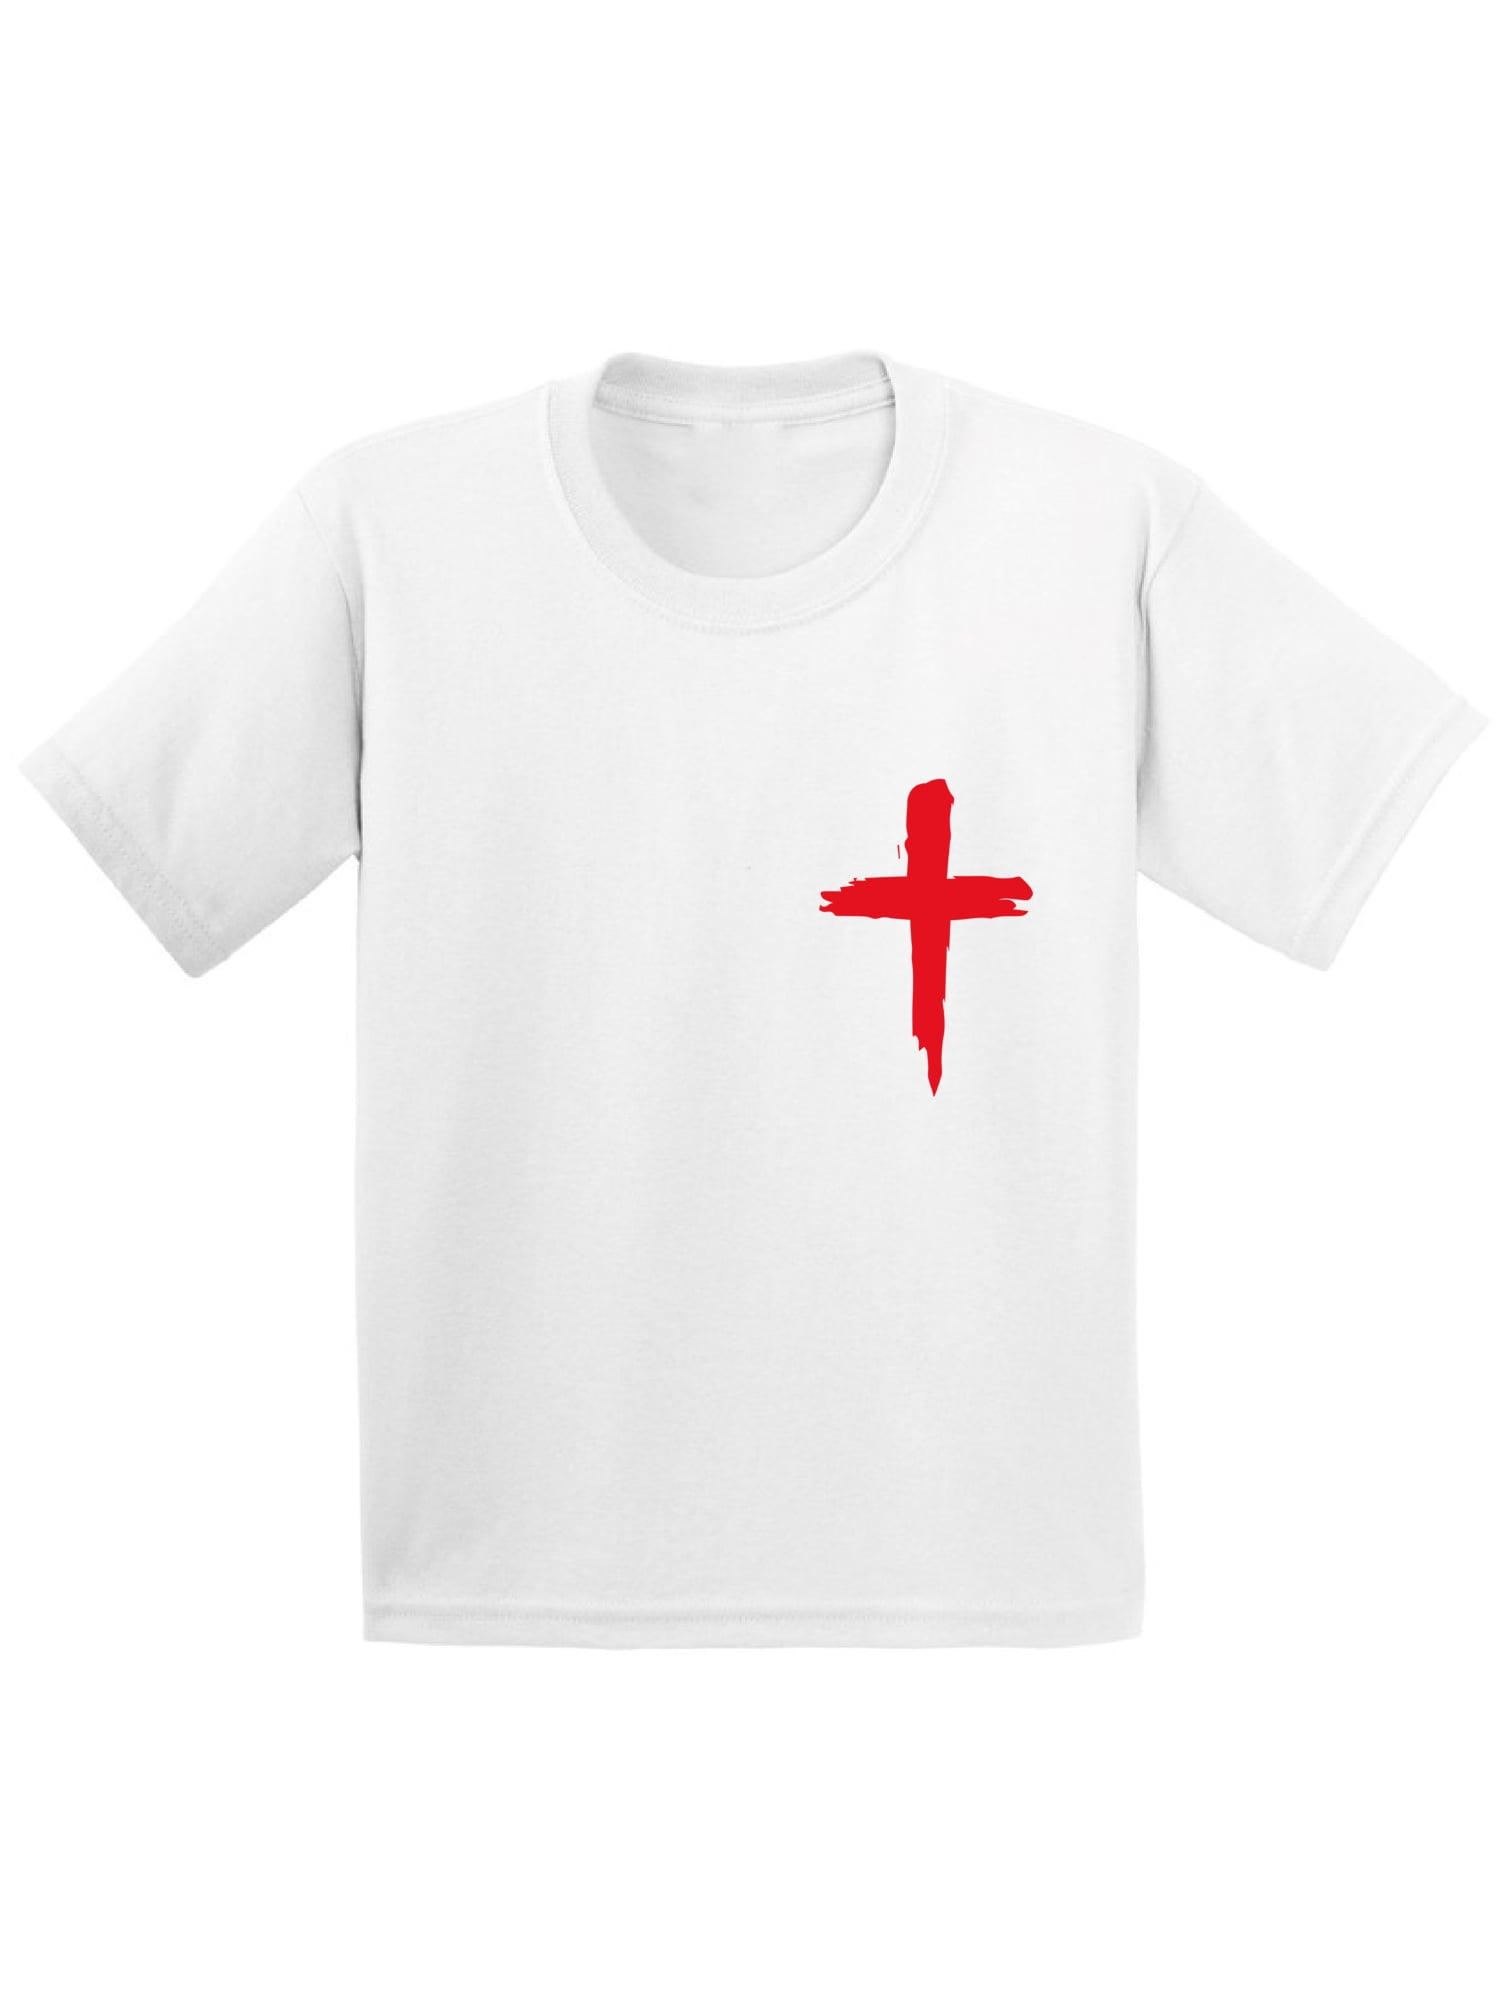 Awkward Styles Red Cross Youth Shirt Christian T Shirt for Boys ...